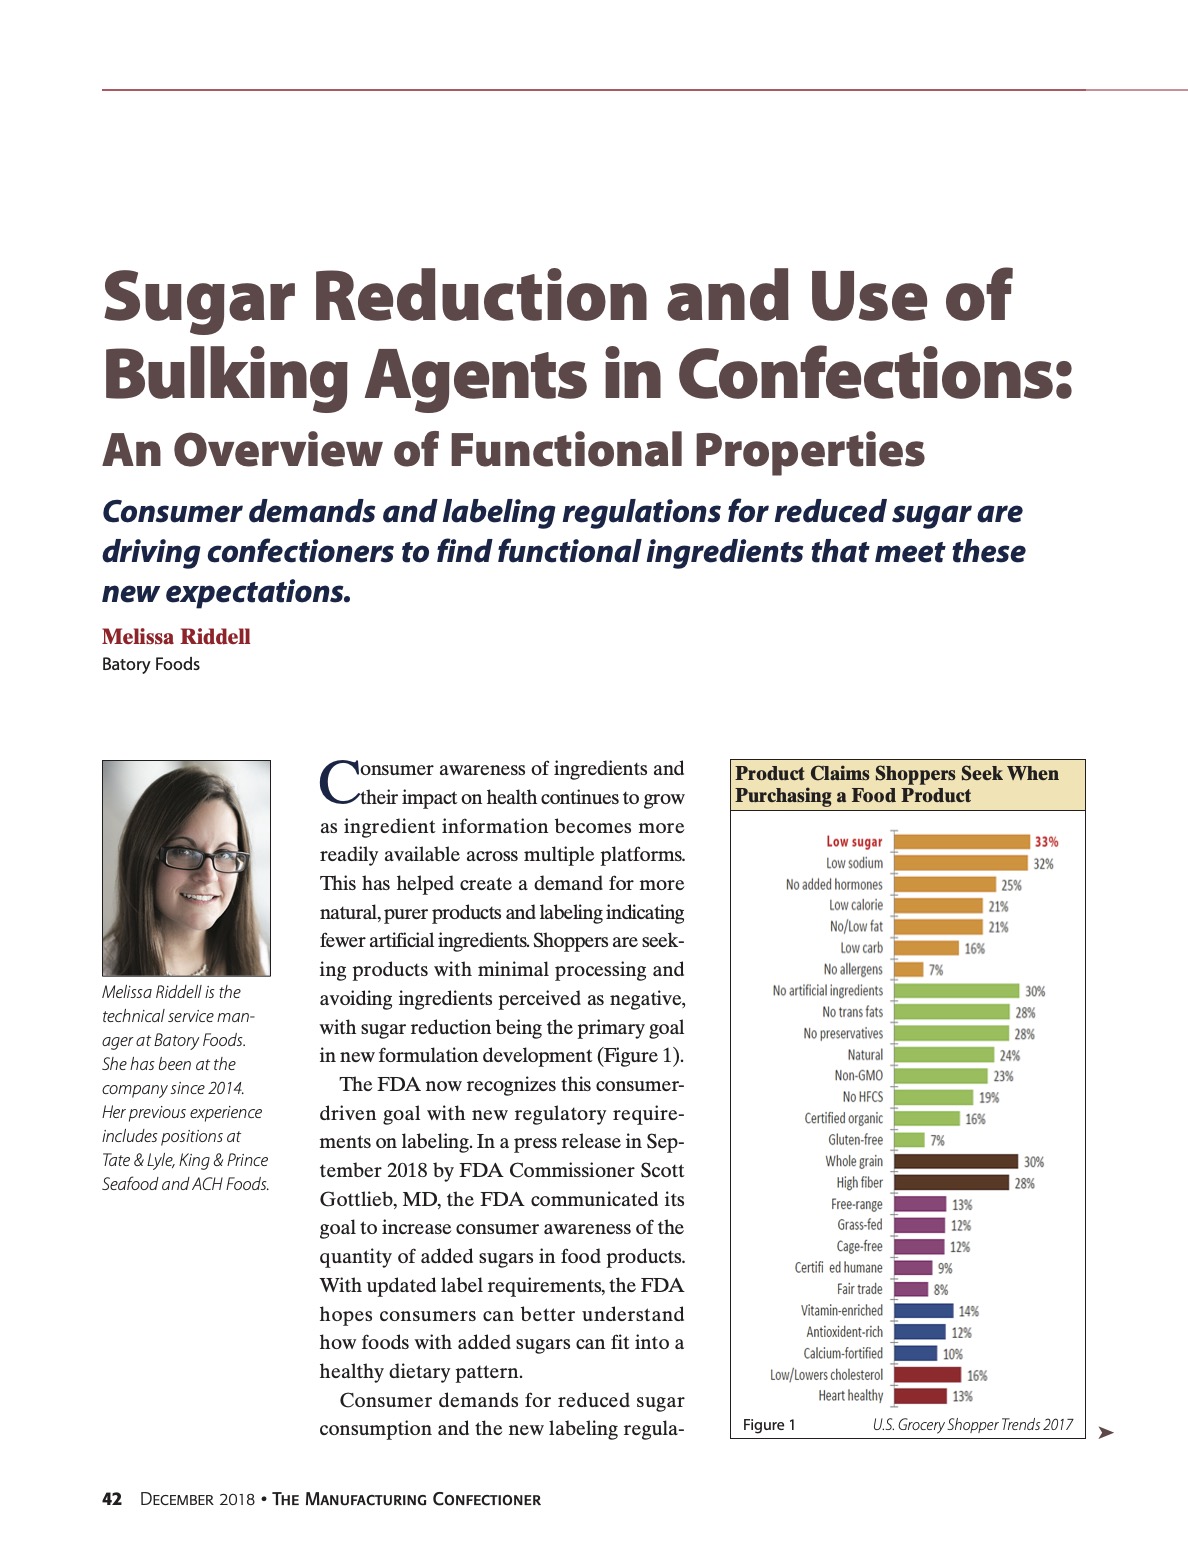 Sugar Reduction and Use of Bulking Agents in Confections